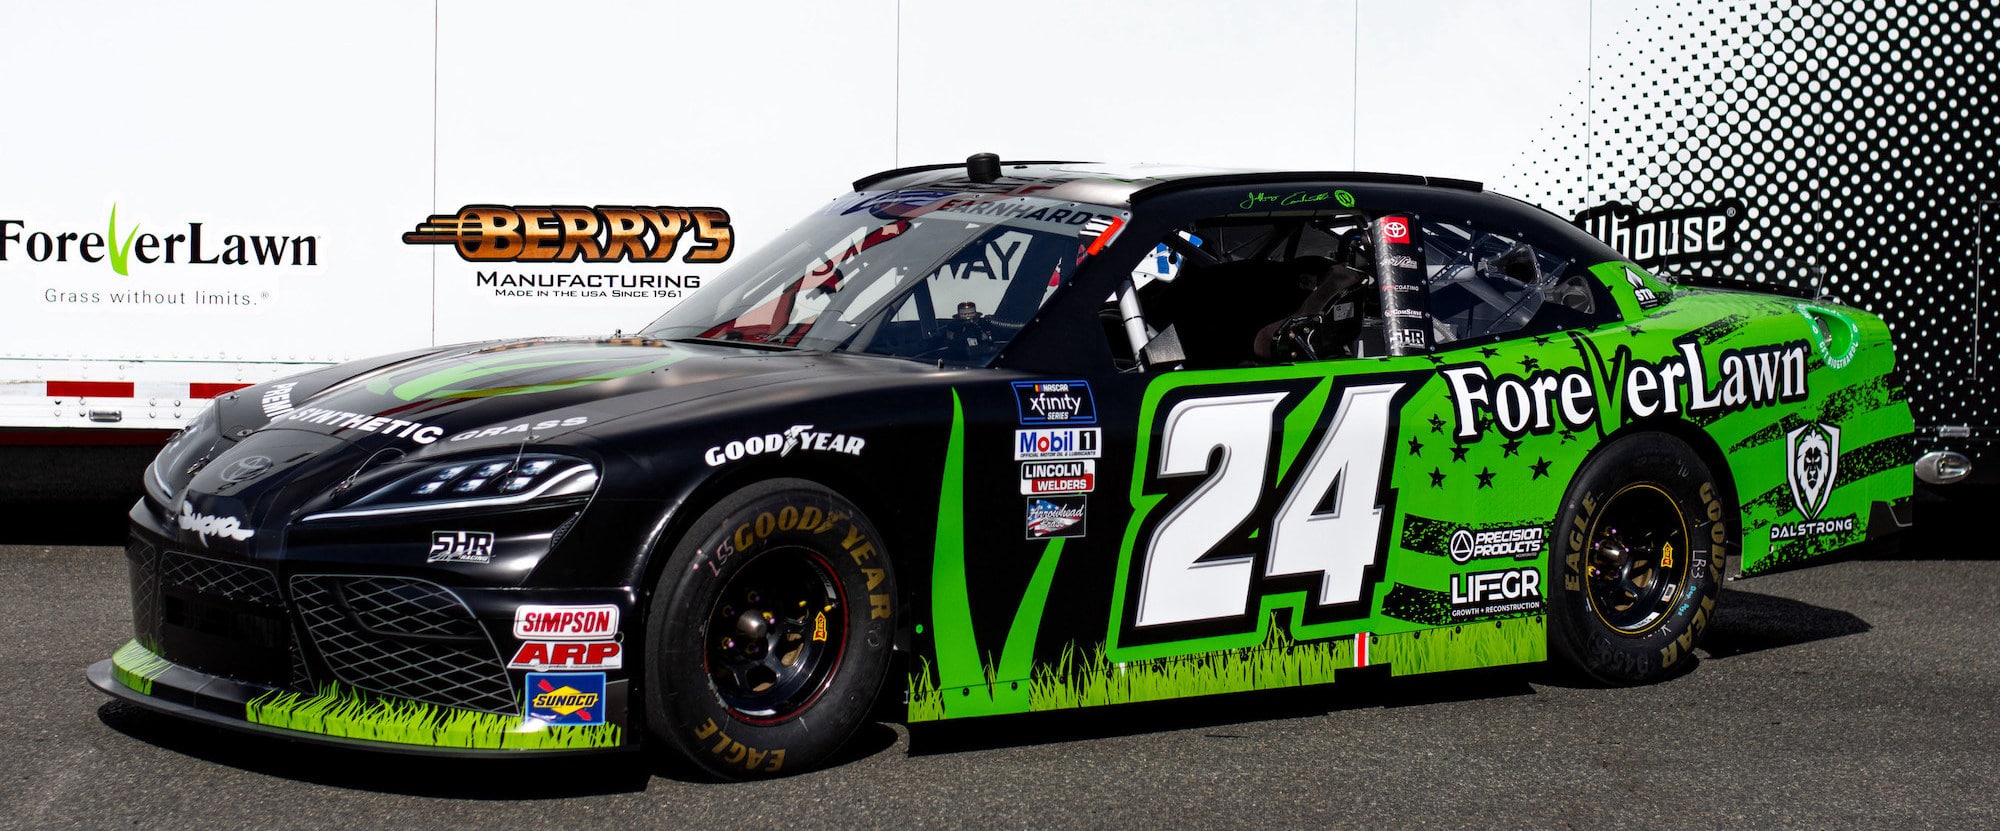 Earnhardt and the #BlackandGreenGrassMachine to debut at Daytona for the 2022 NASCAR Xfinity Series.